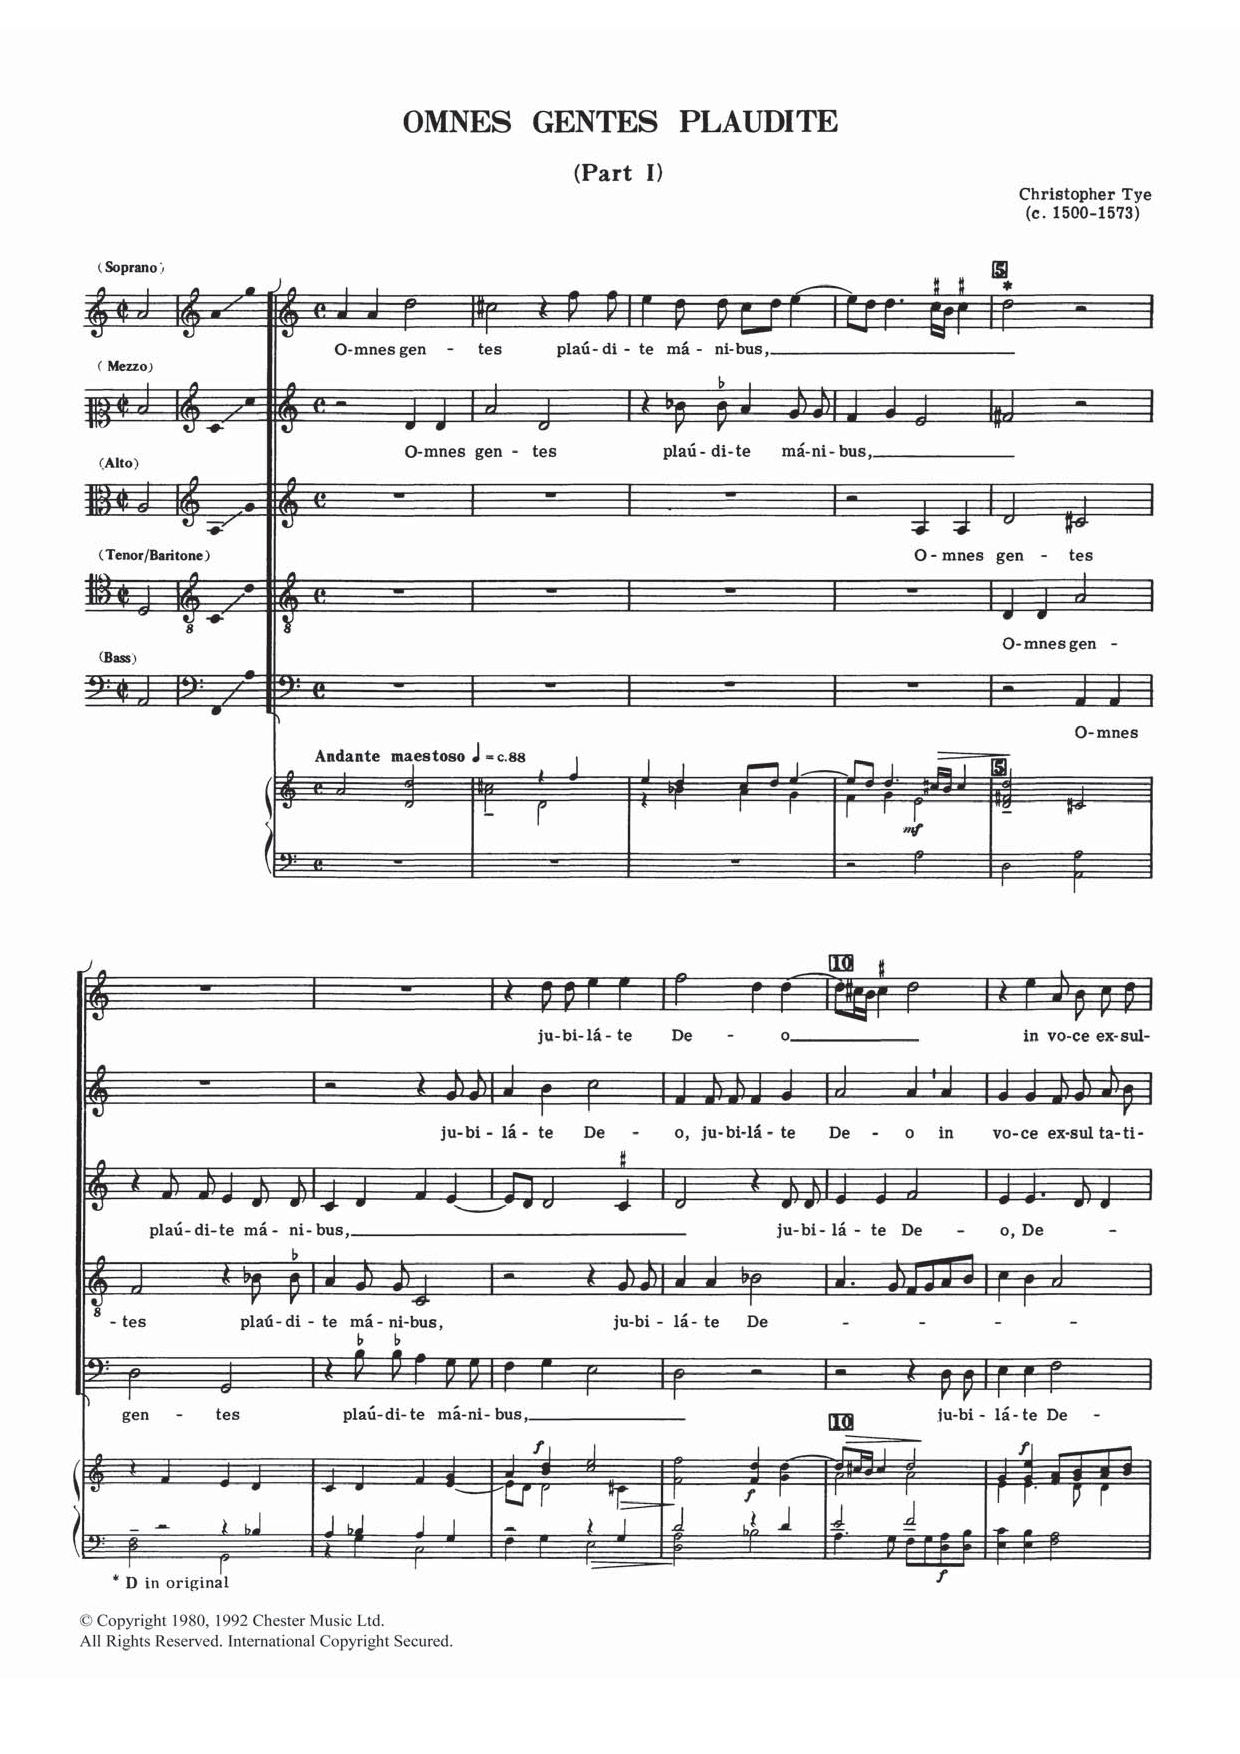 Download Christopher Tye Omnes Gentes Plaudite (Parts I And II) Sheet Music